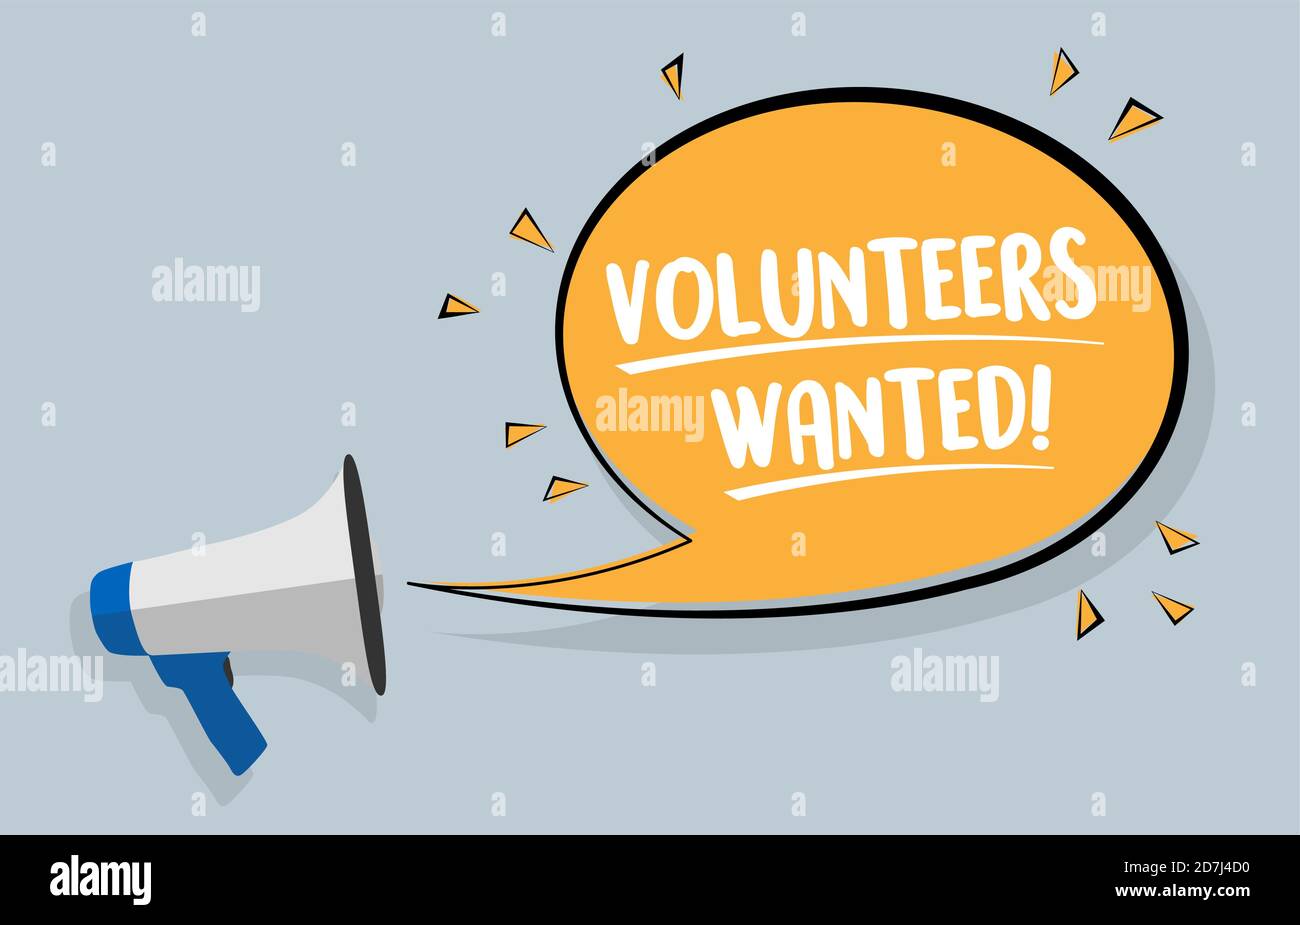 megaphone and text VOLUNTEERS WANTED in speech bubble against colored background vector illustration Stock Vector